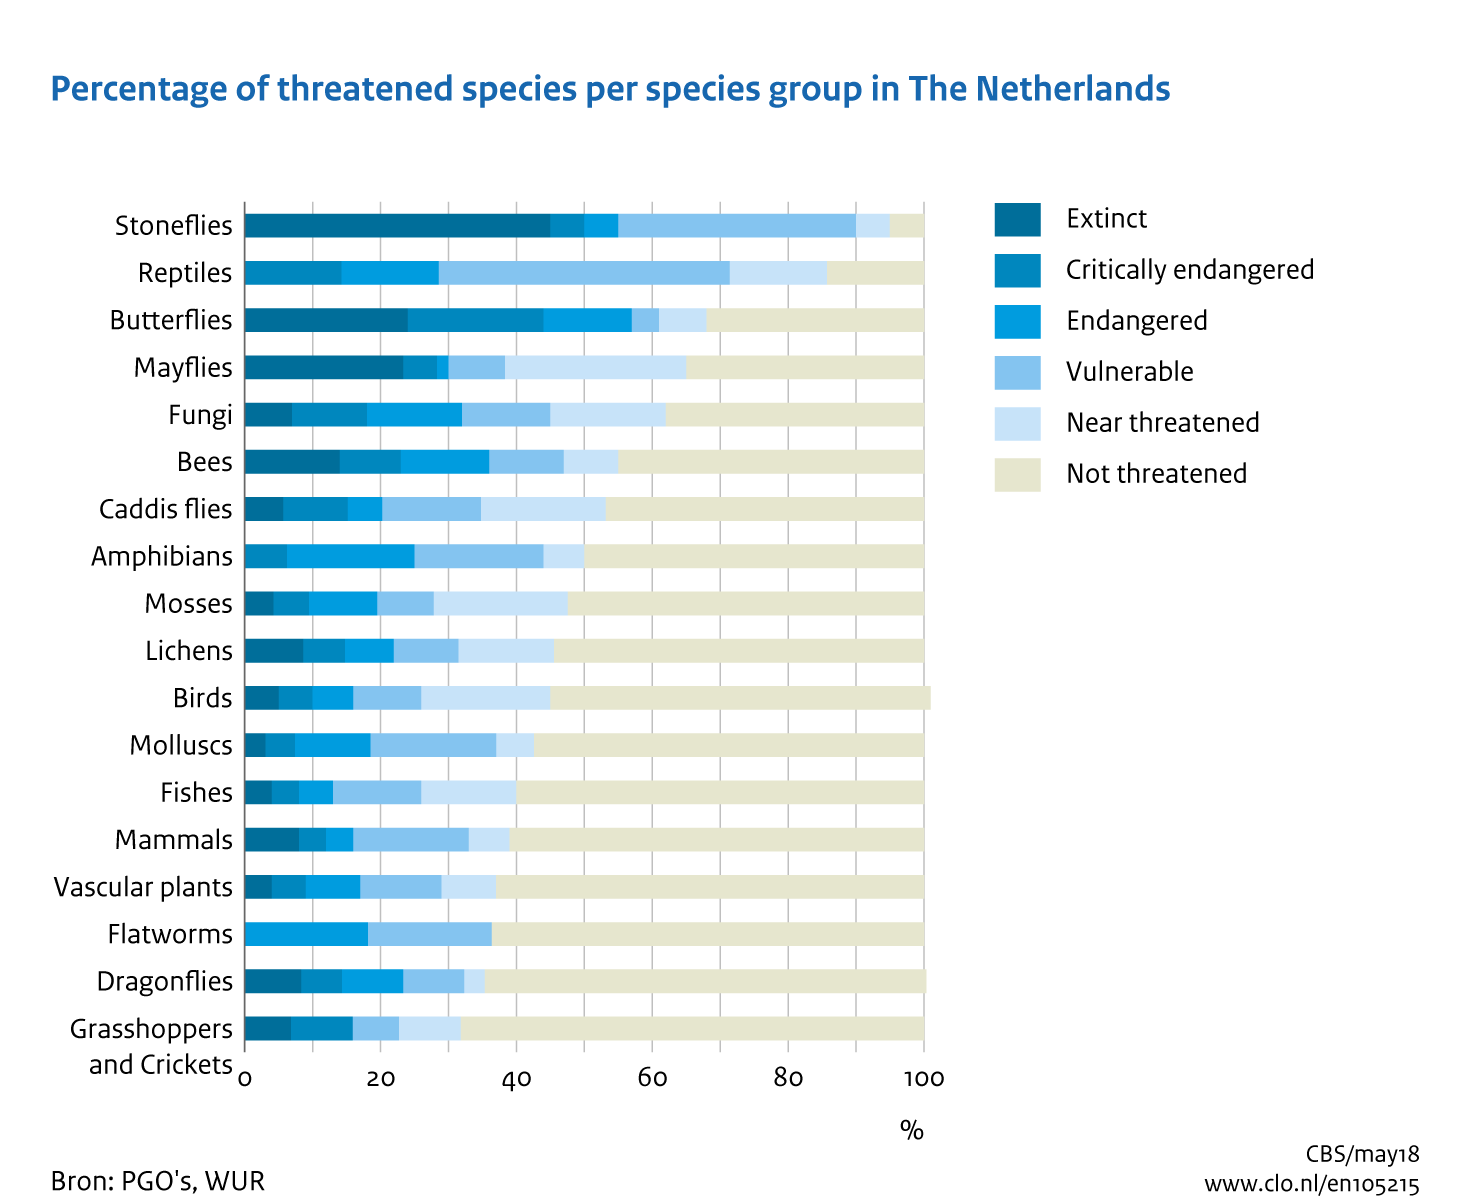 Image Threatened species in The Netherlands. The image is further explained in the text.